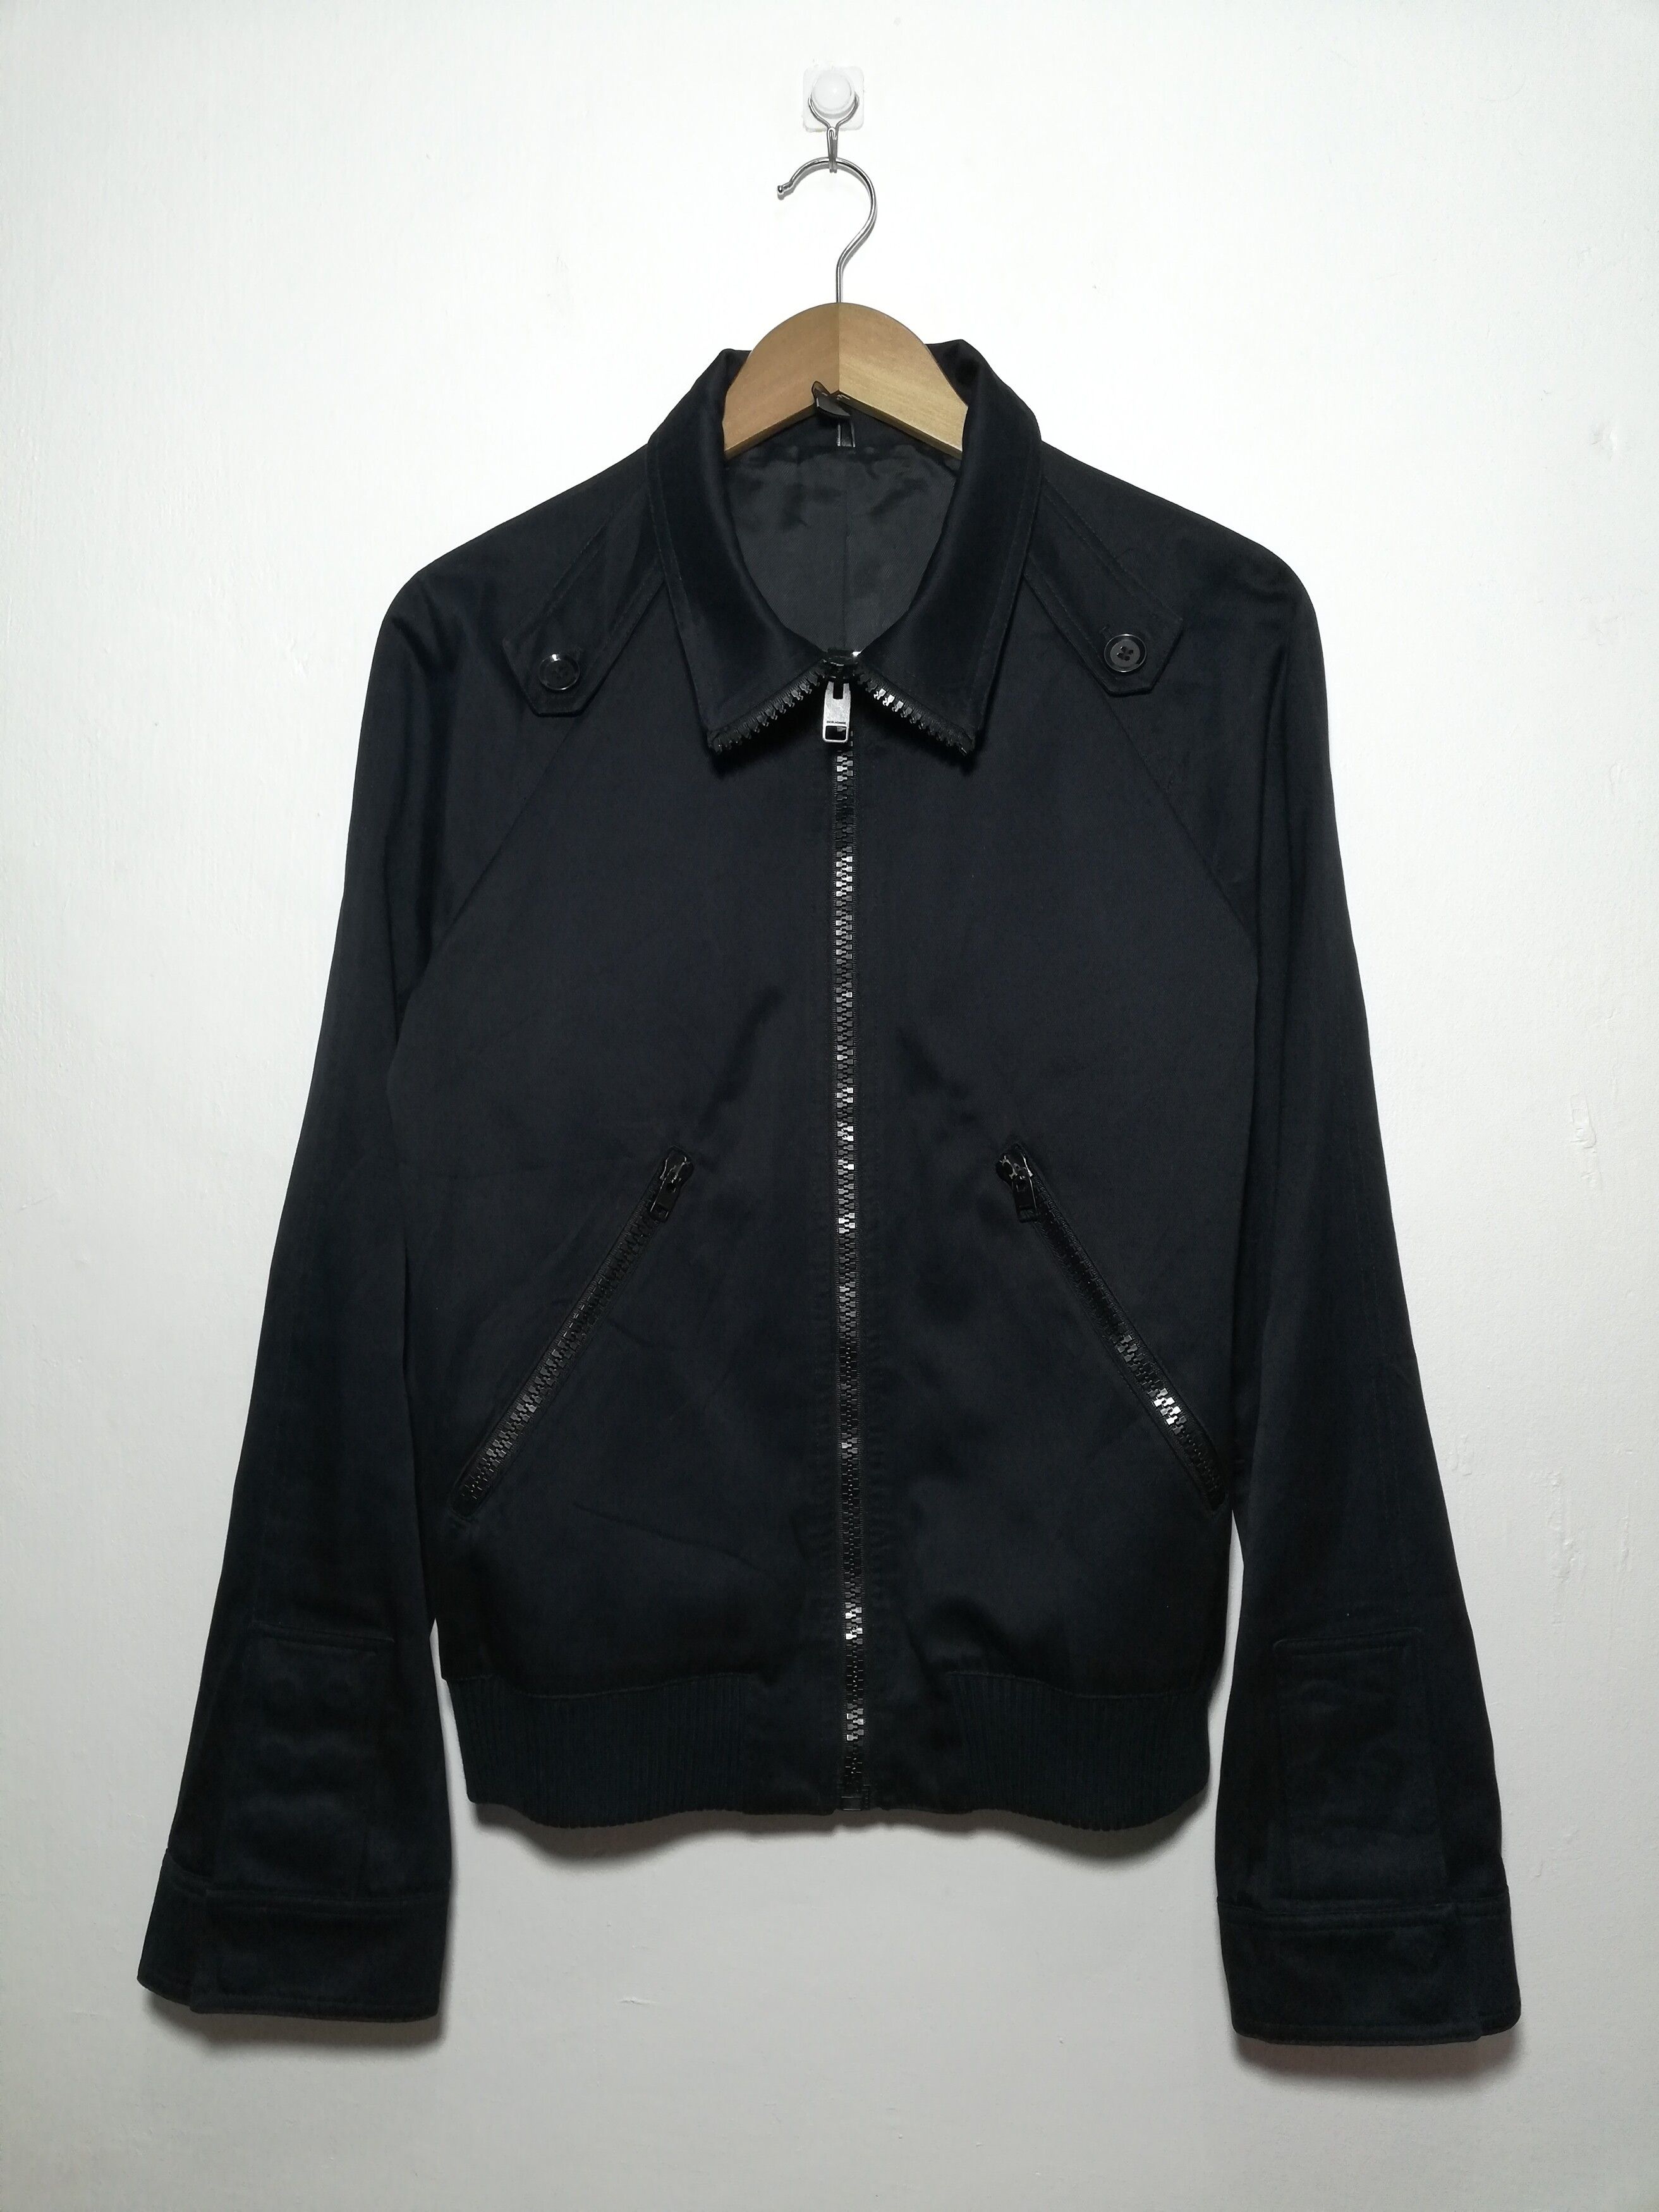 Dior Homme SS07 Bomber Jacket - 1